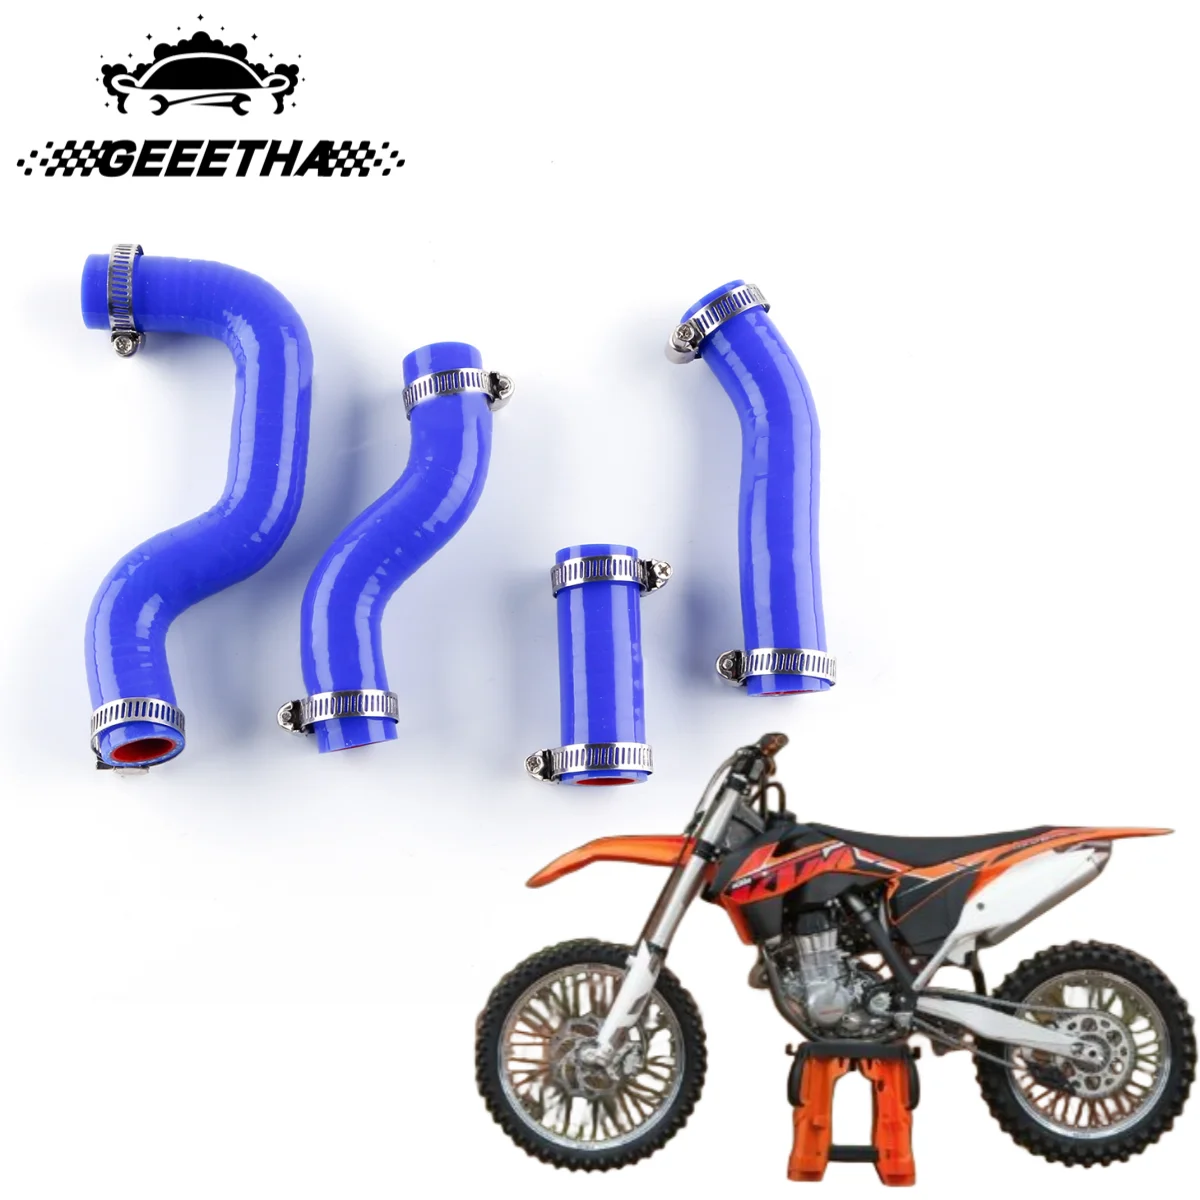 

For 2012-2015 KTM 450SXF 450 SXF 2013 2014 Motorcycle Silicone Radiator Coolant Hose Pipe Kit